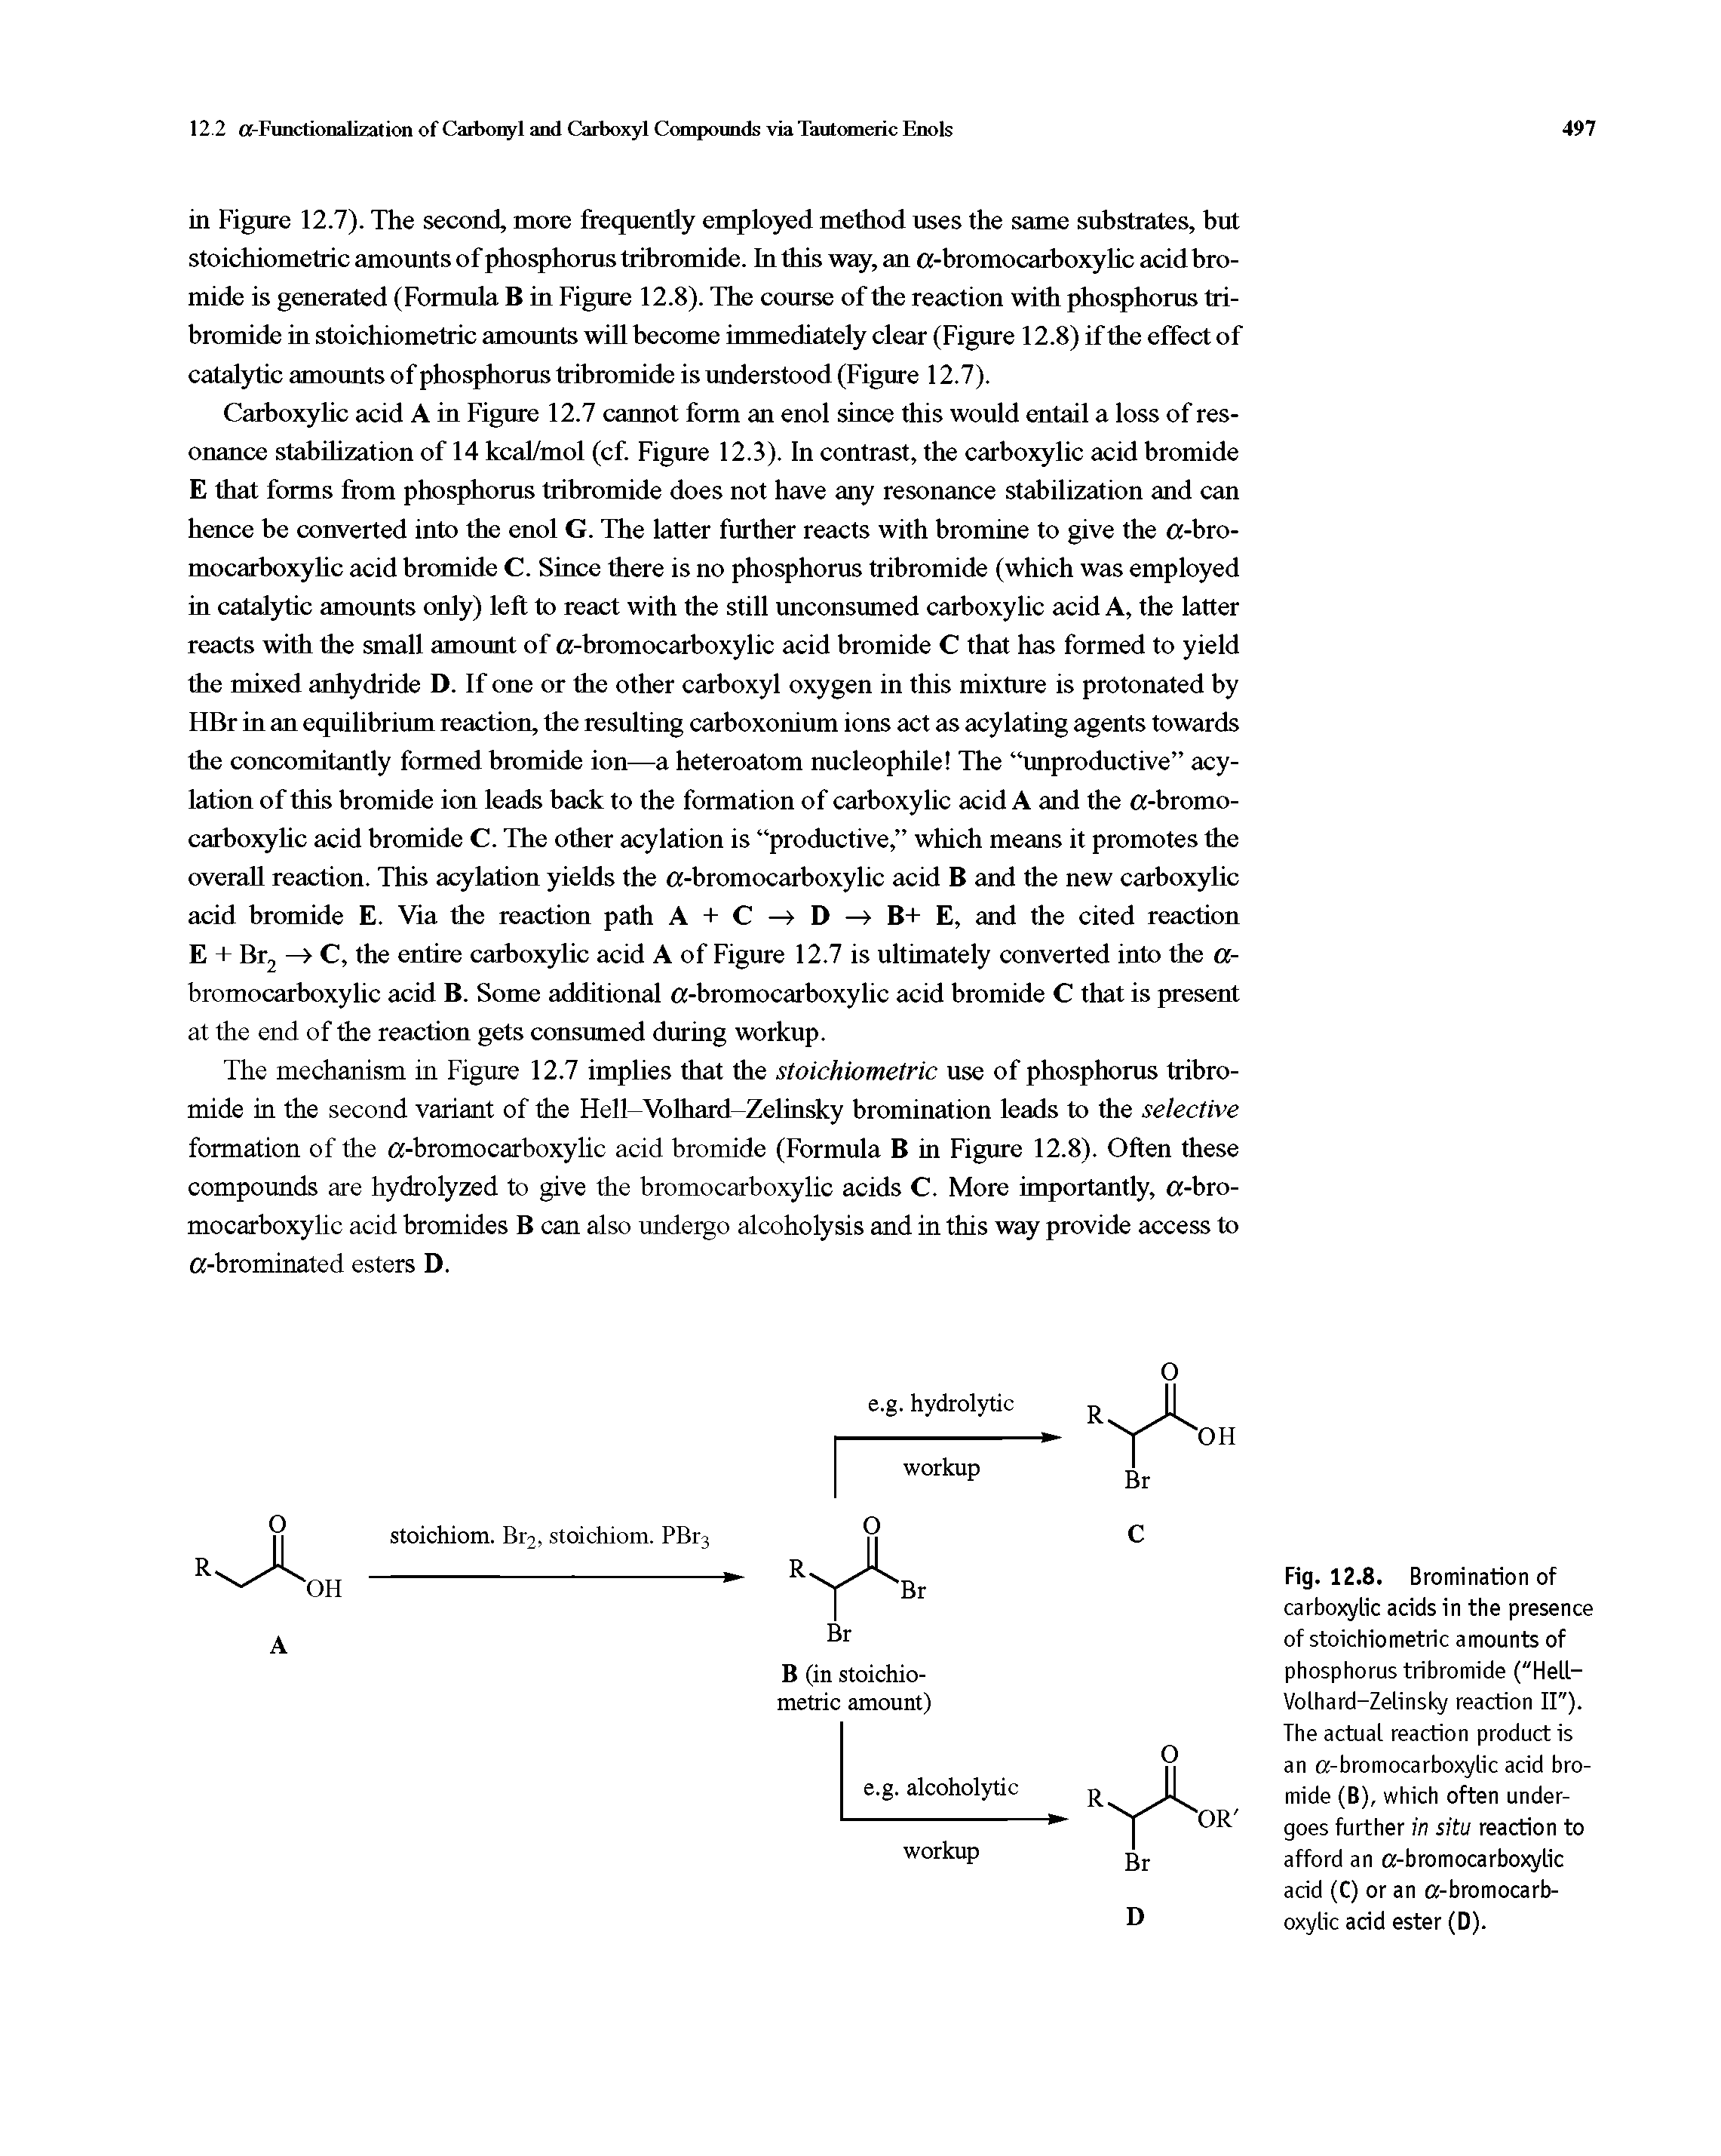 Fig. 12.8. Bromination of carboxylic acids in the presence of stoichiometric amounts of phosphorus tribromide ("Hell-Volhard-Zelinsky reaction II"). The actual reaction product is an a-bromocarboxylic acid bromide (B), which often undergoes further in situ reaction to afford an a-bromocarboxylic acid (C) or an a-bromocarboxylic acid ester (D).